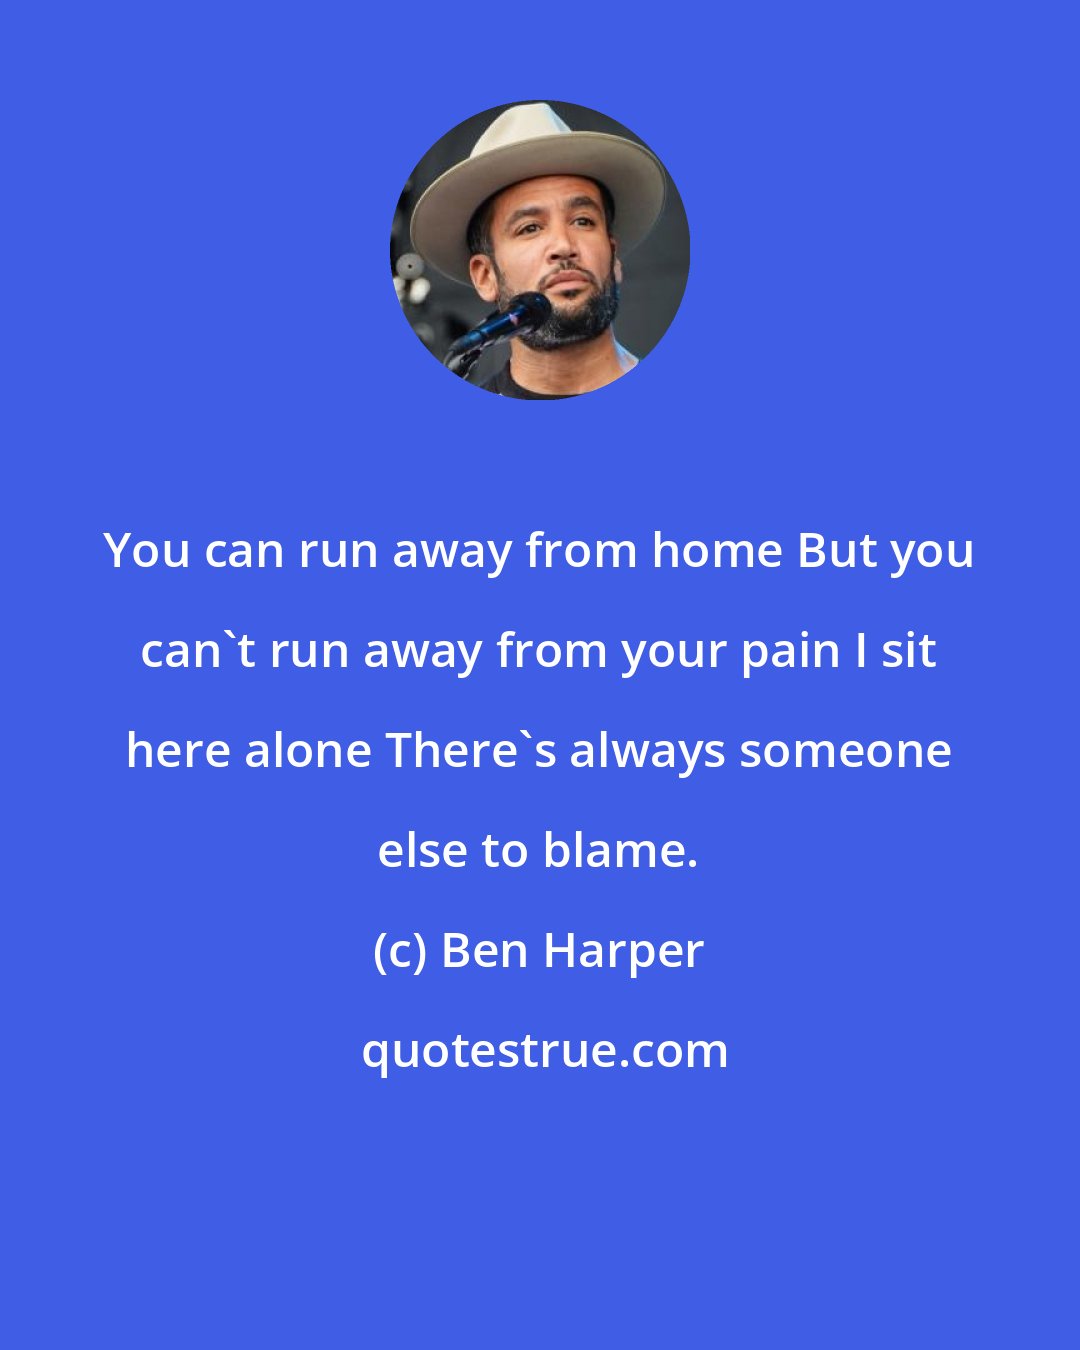 Ben Harper: You can run away from home But you can't run away from your pain I sit here alone There's always someone else to blame.